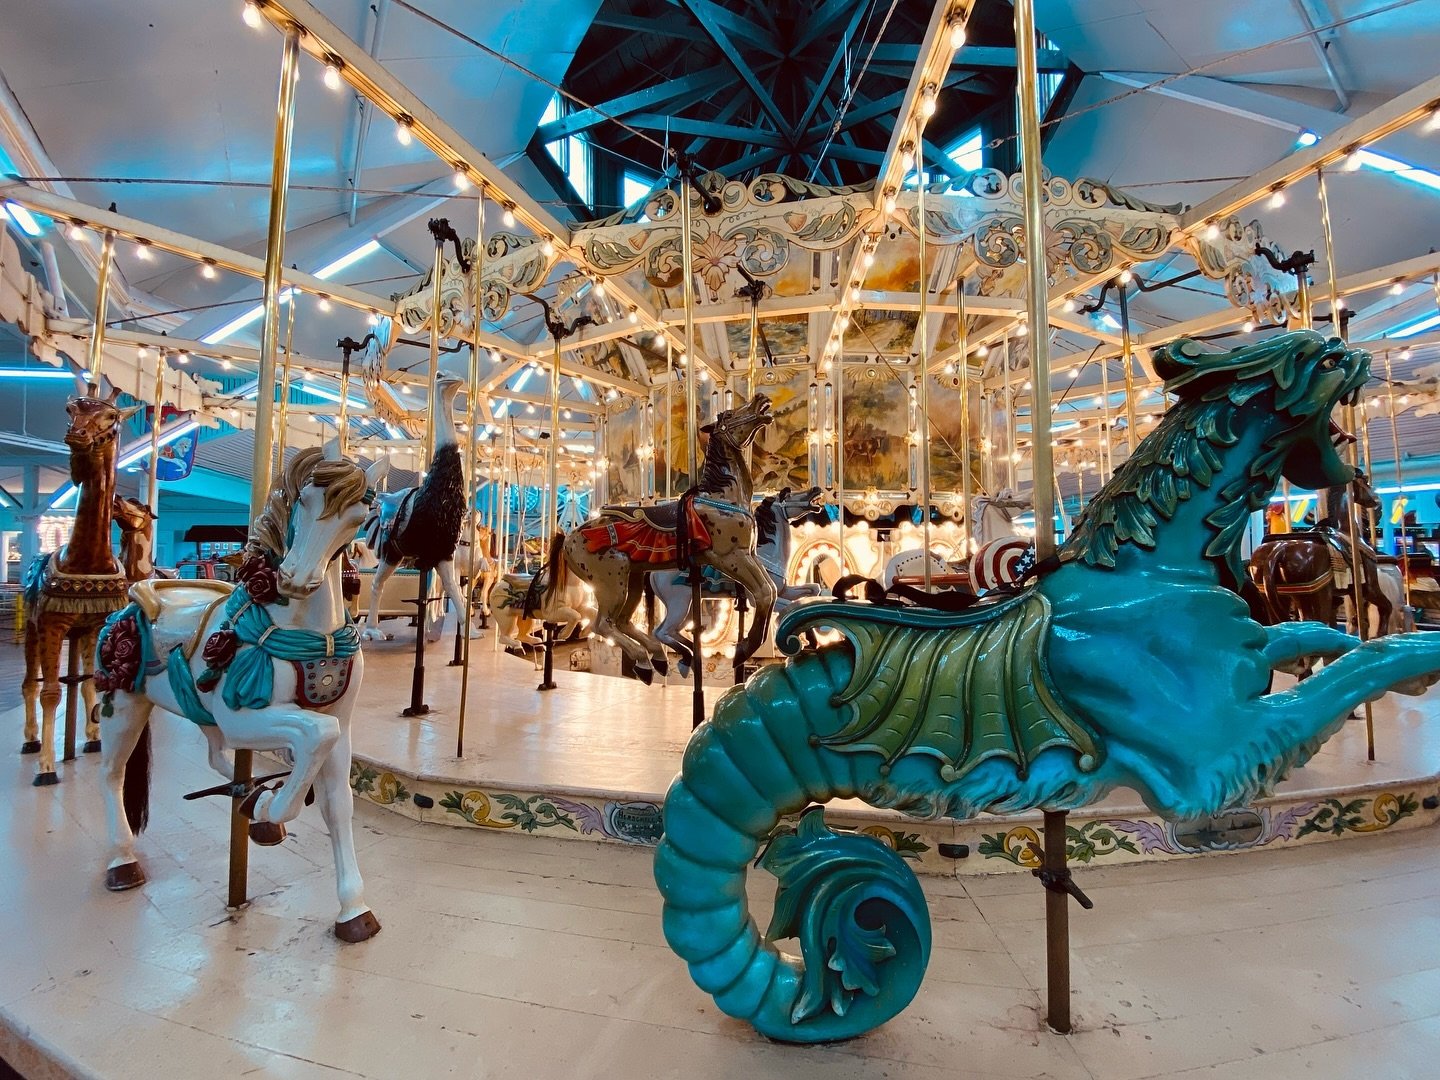 This year&rsquo;s Historic Sites Tour features @trimperrides on the Boardwalk! Learn more about this over 100 year old establishment and take a free ride on the carousel!Tickets are still available for the Historic Sites Tour and slots are still avai